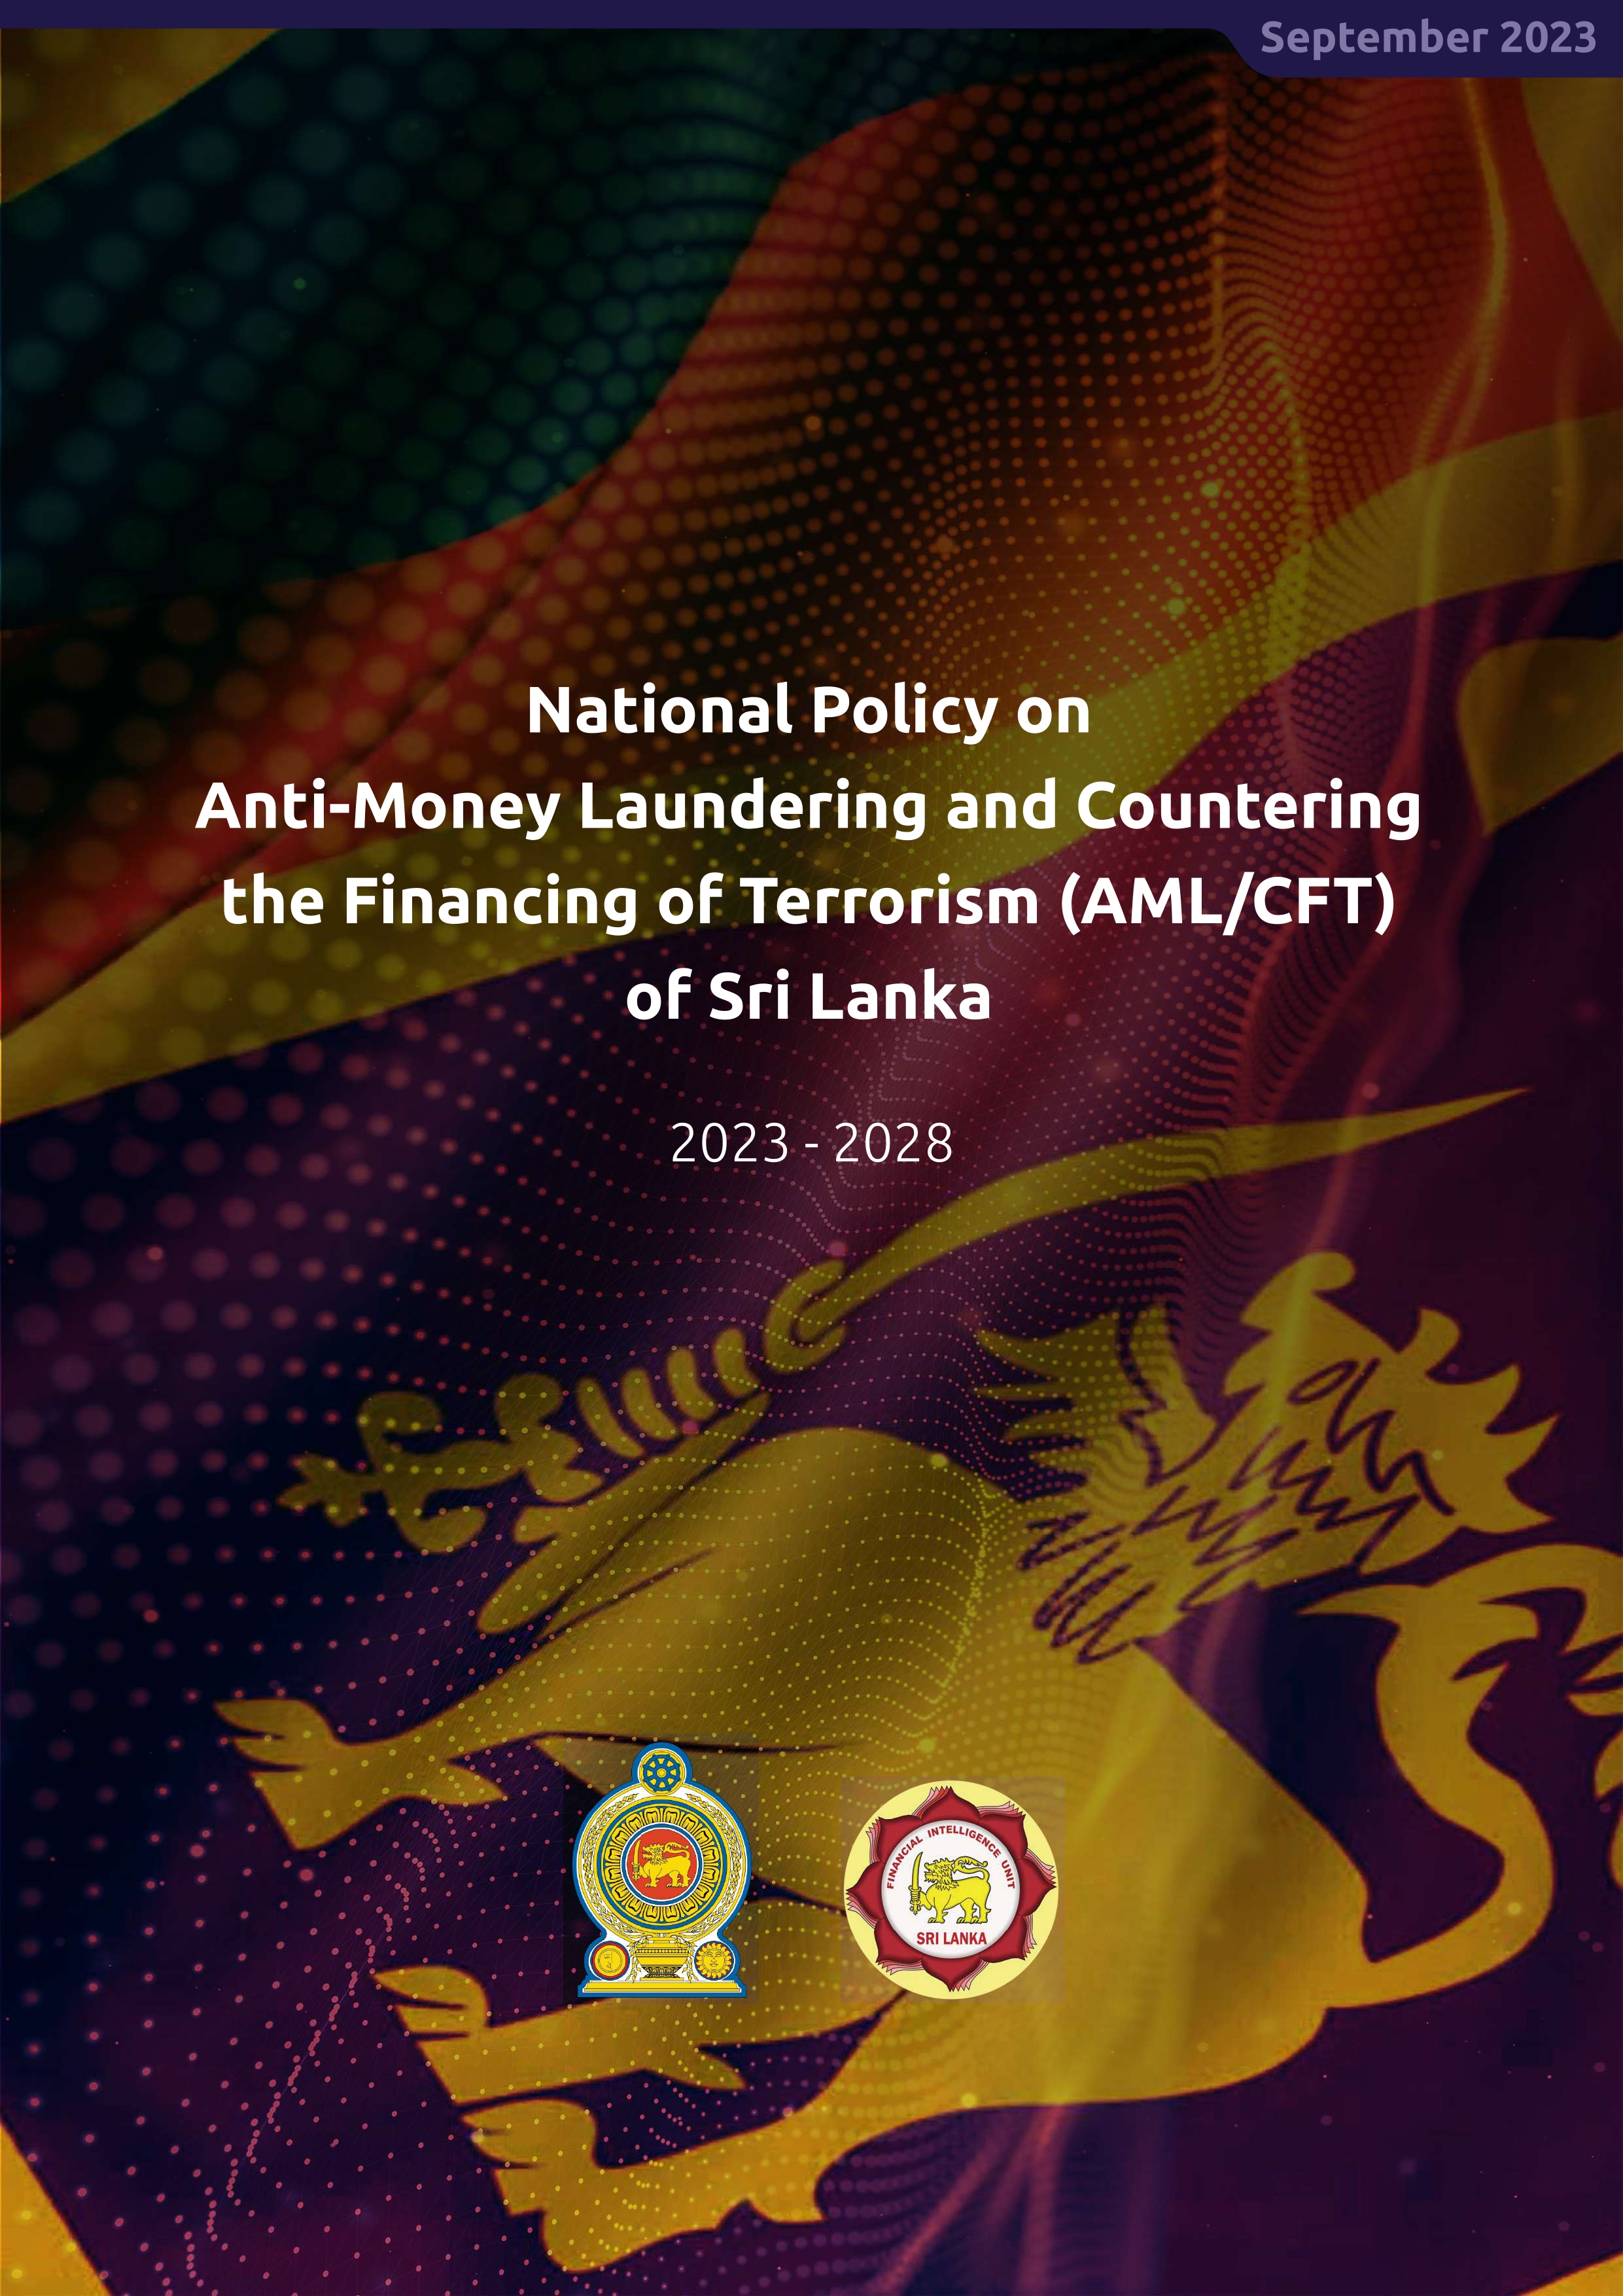 National AML/CFT Policy (2023-2028)